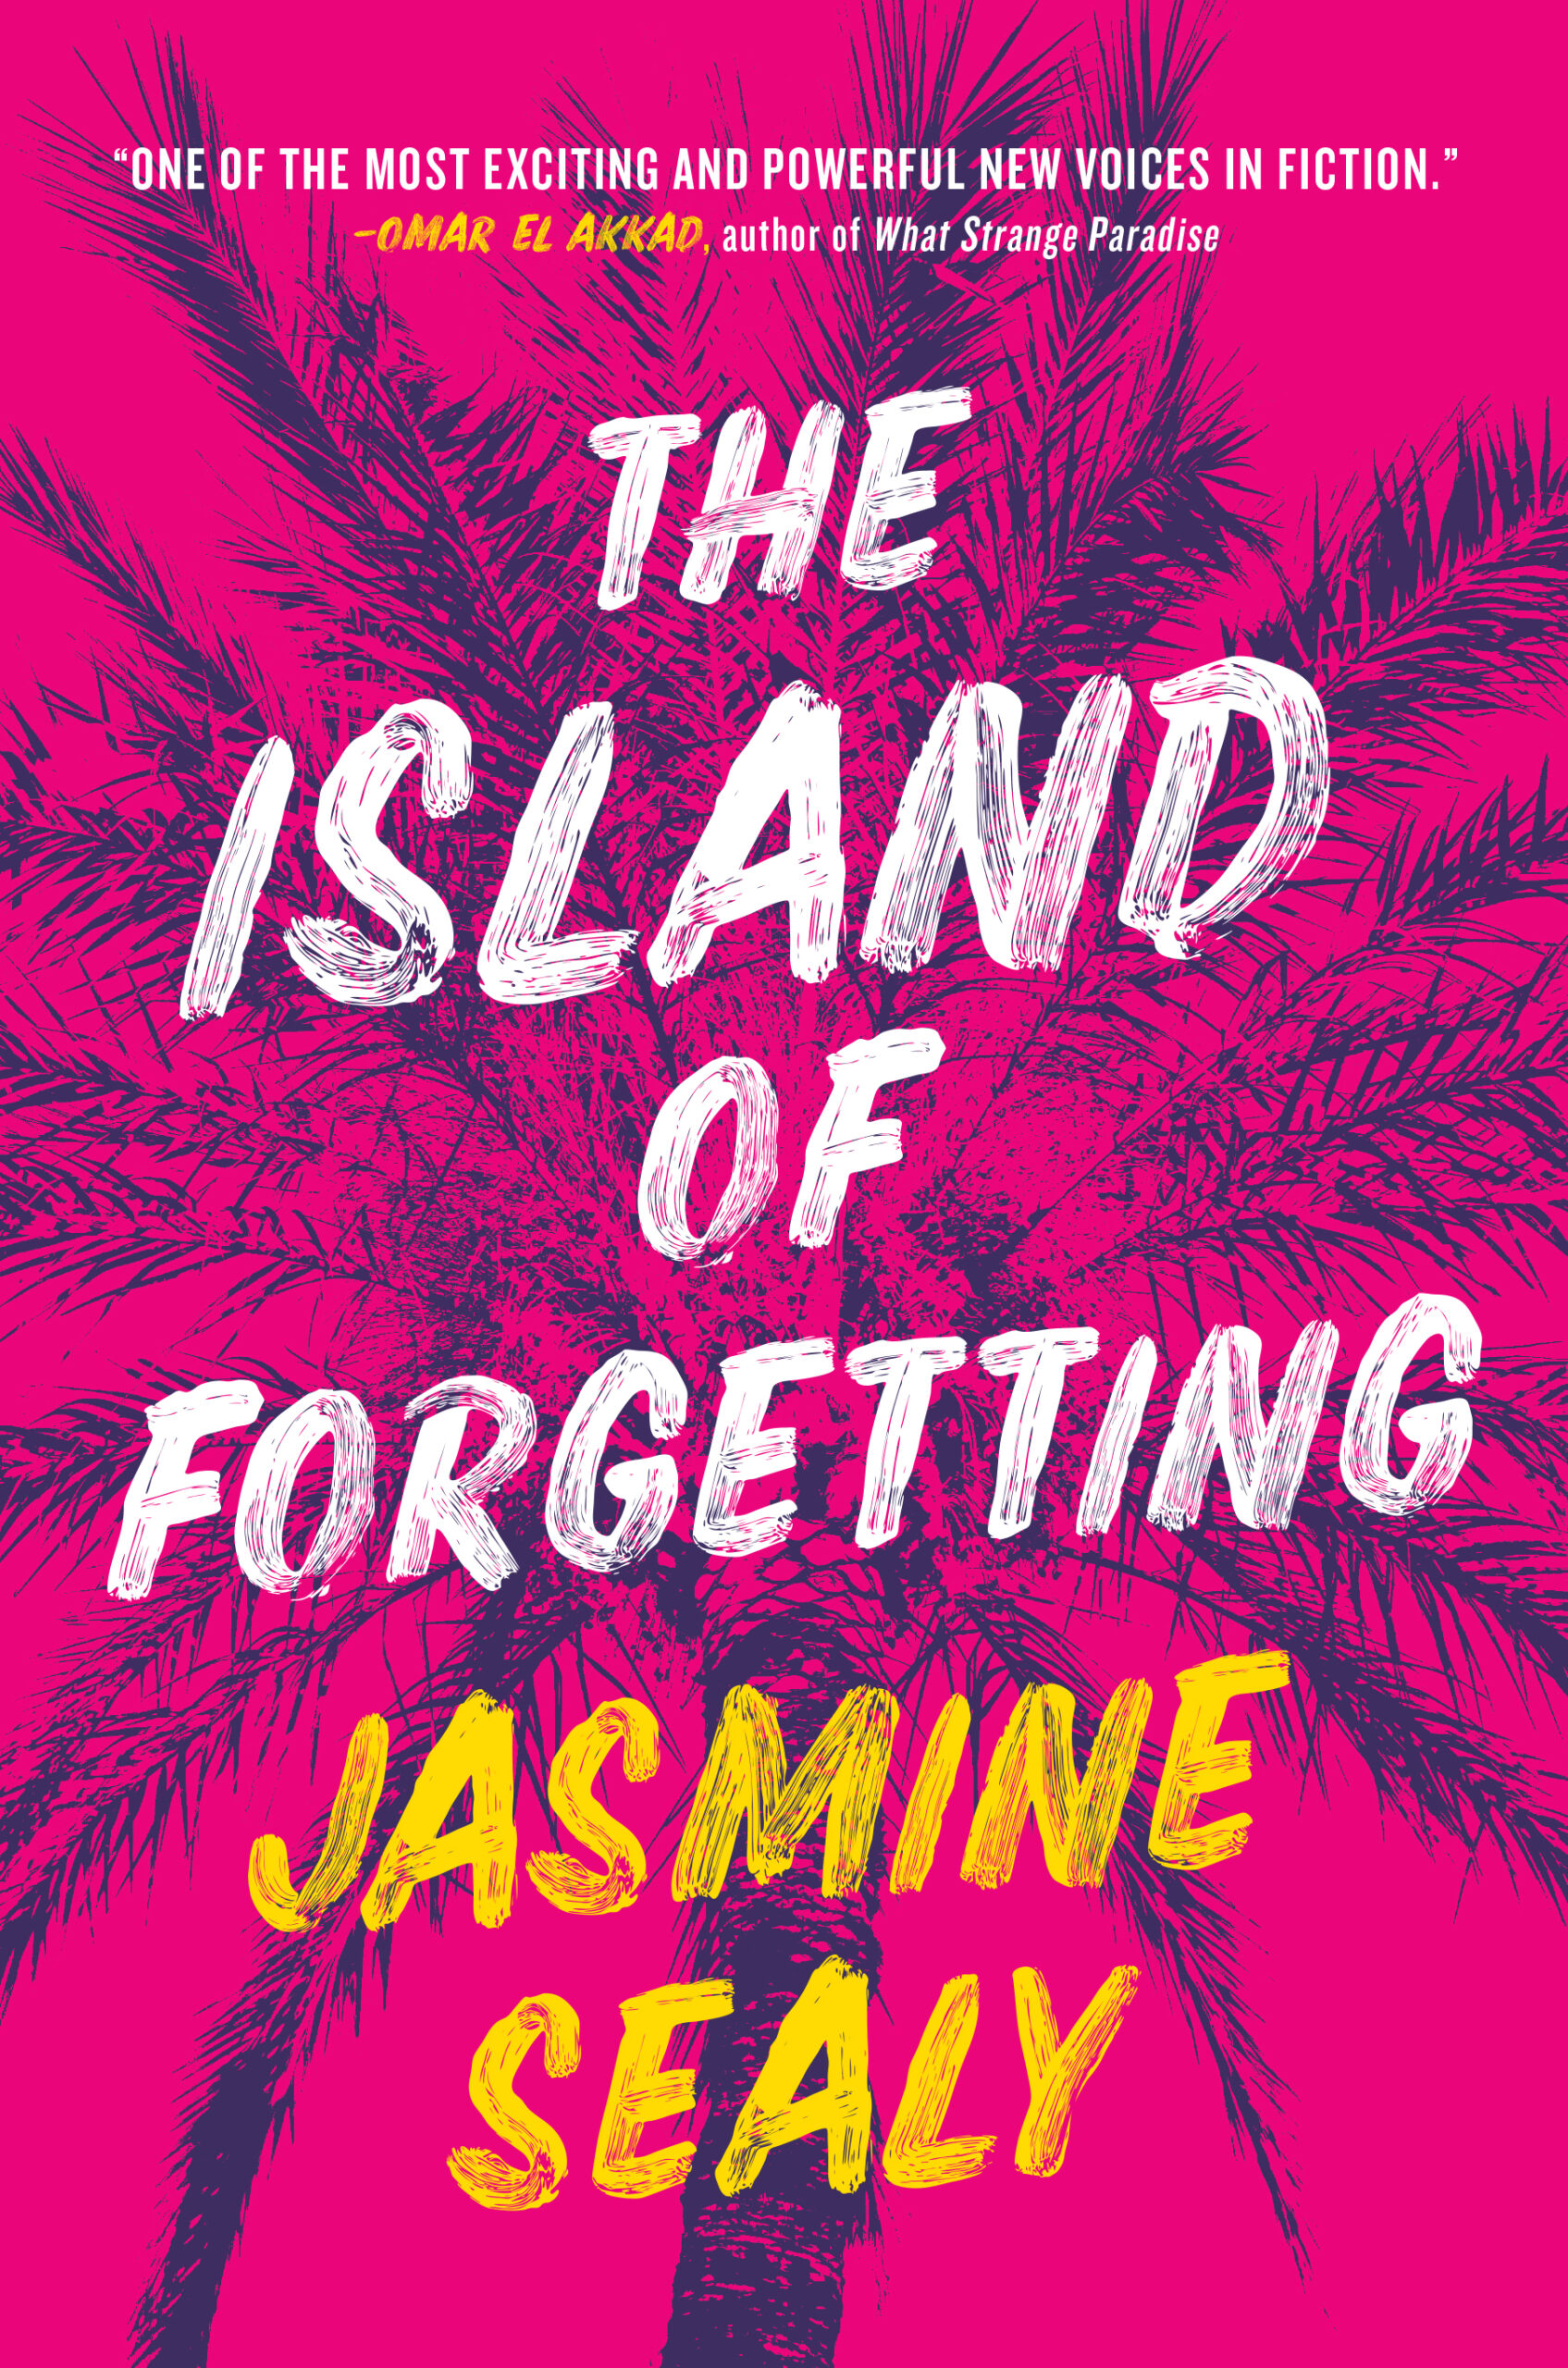 Jasmine Sealy's The Island of Forgetting book cover